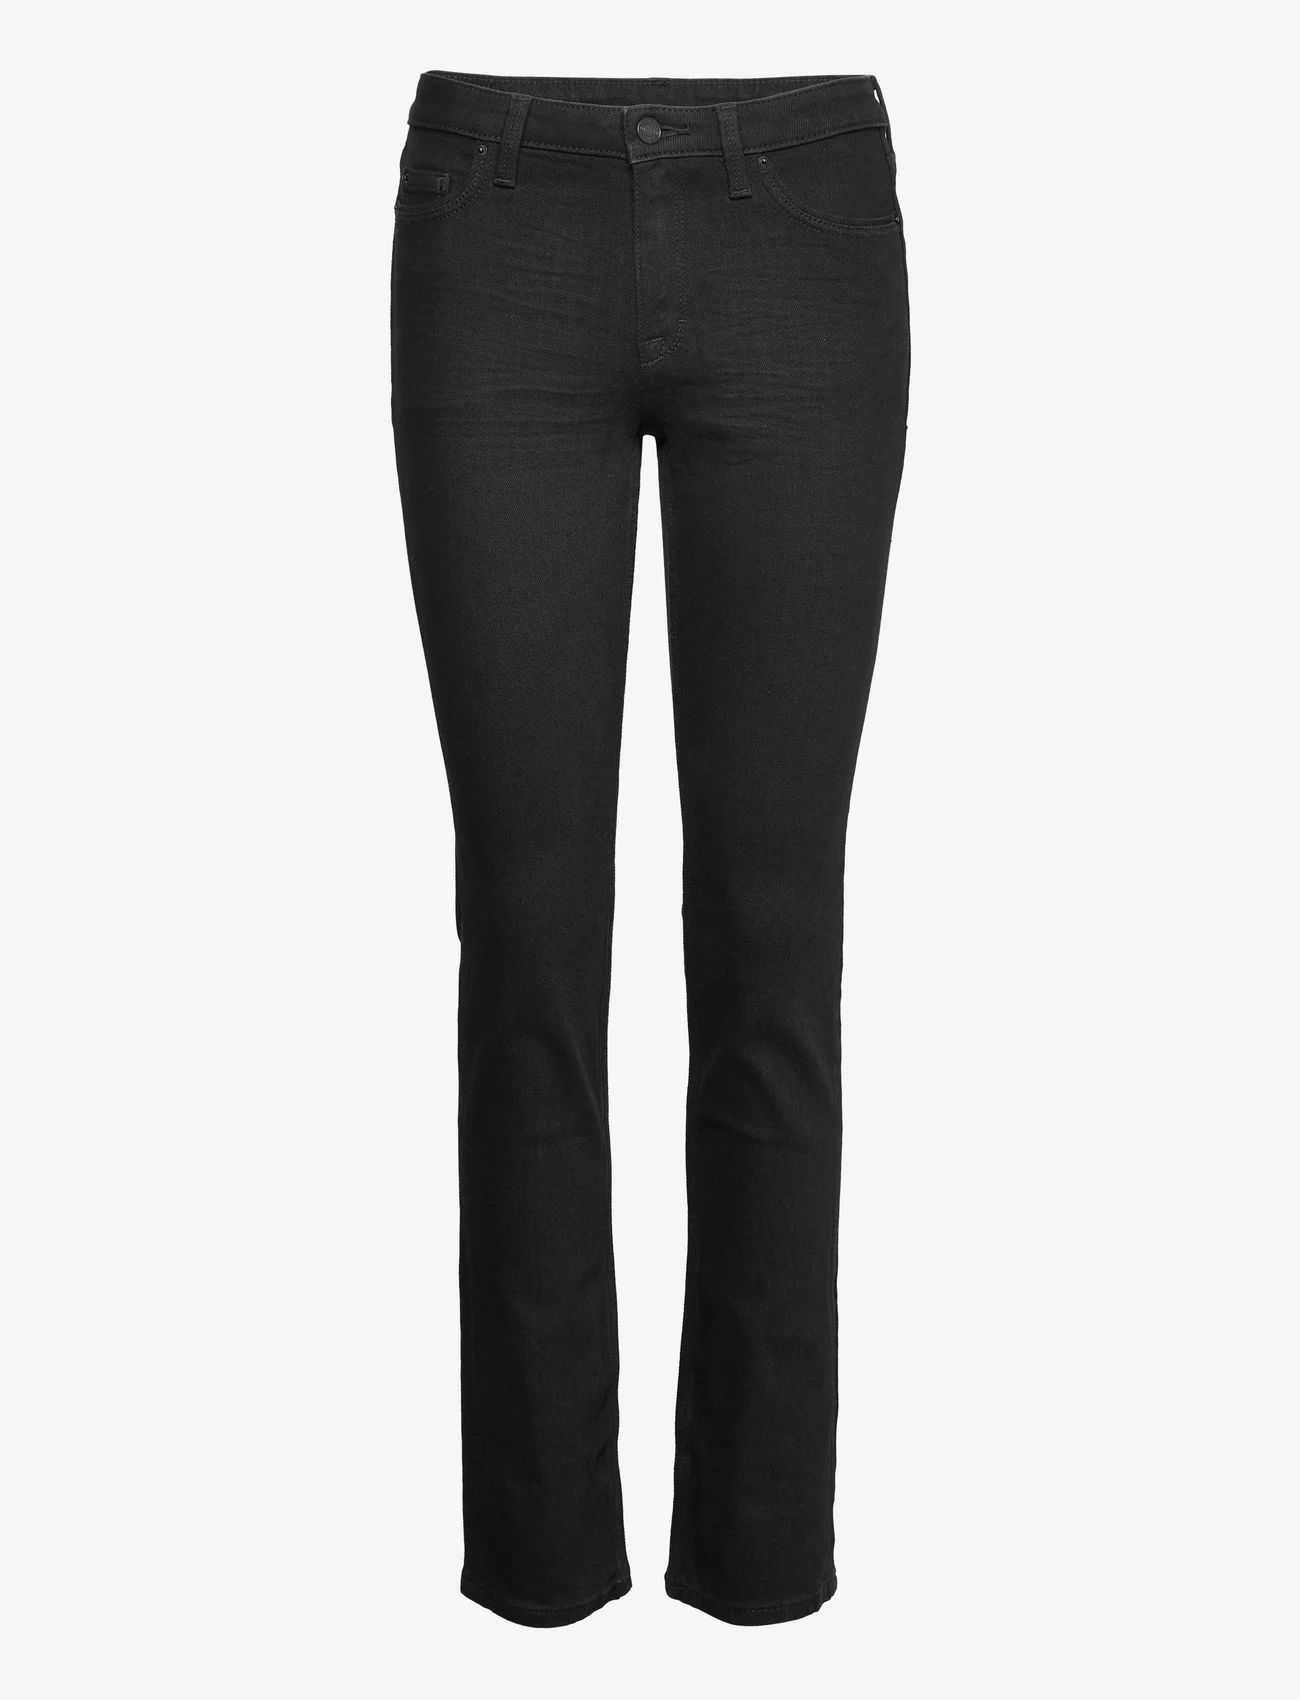 Esprit Casual - Straight leg stretch jeans - straight jeans - black rinse - 0